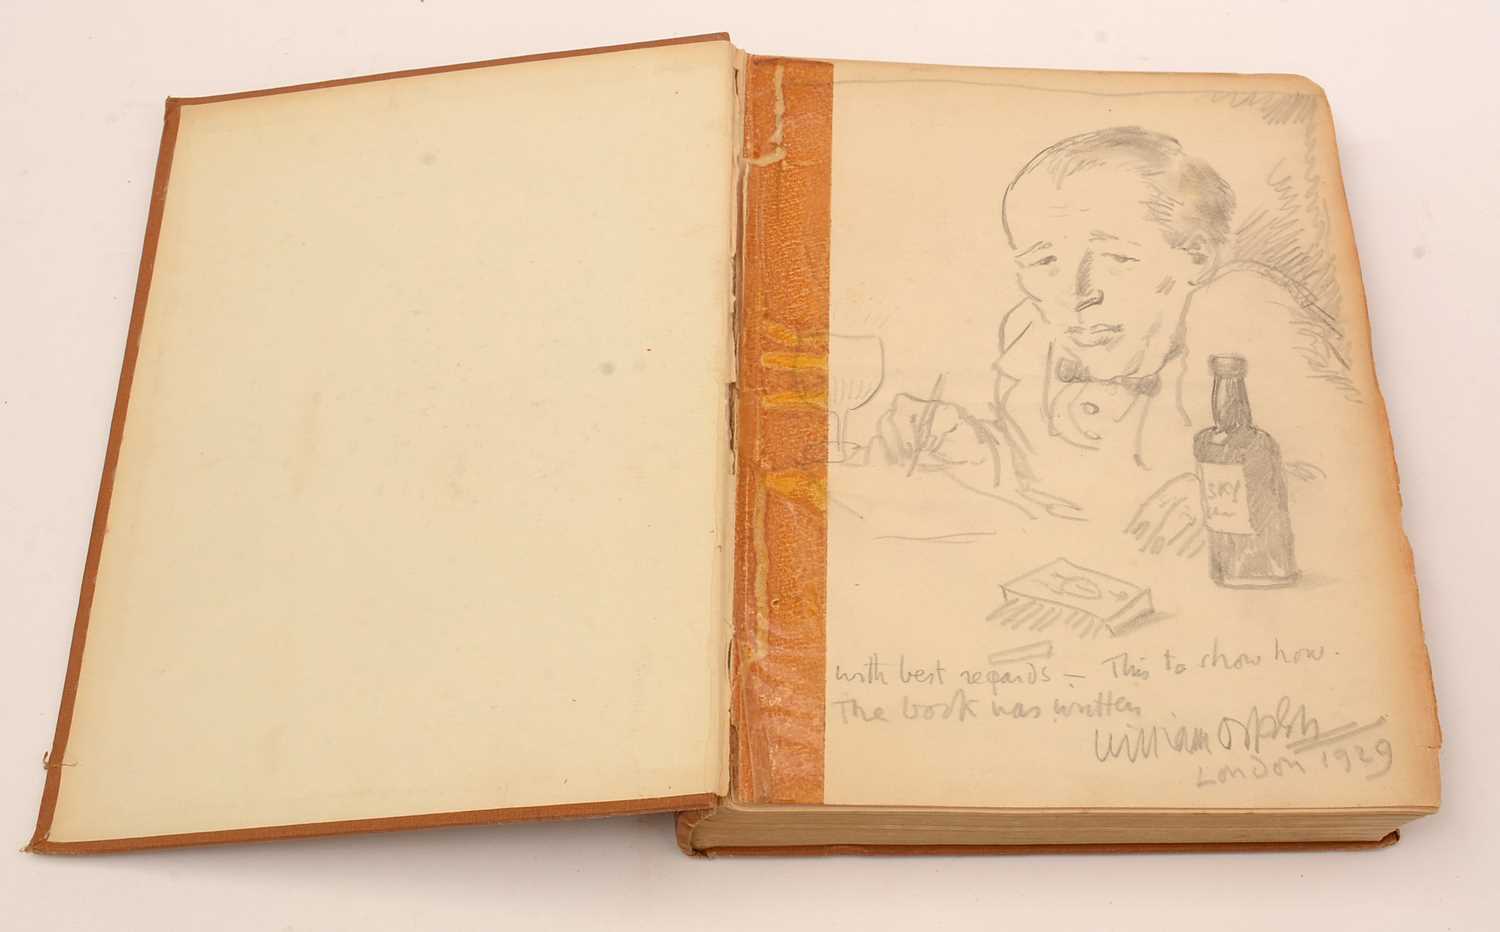 Lot 113 - Orpen (Sir William) An Onlooker In France, 1917-1919, 4to, cloth, illus., revised and enlarged edition, 1924